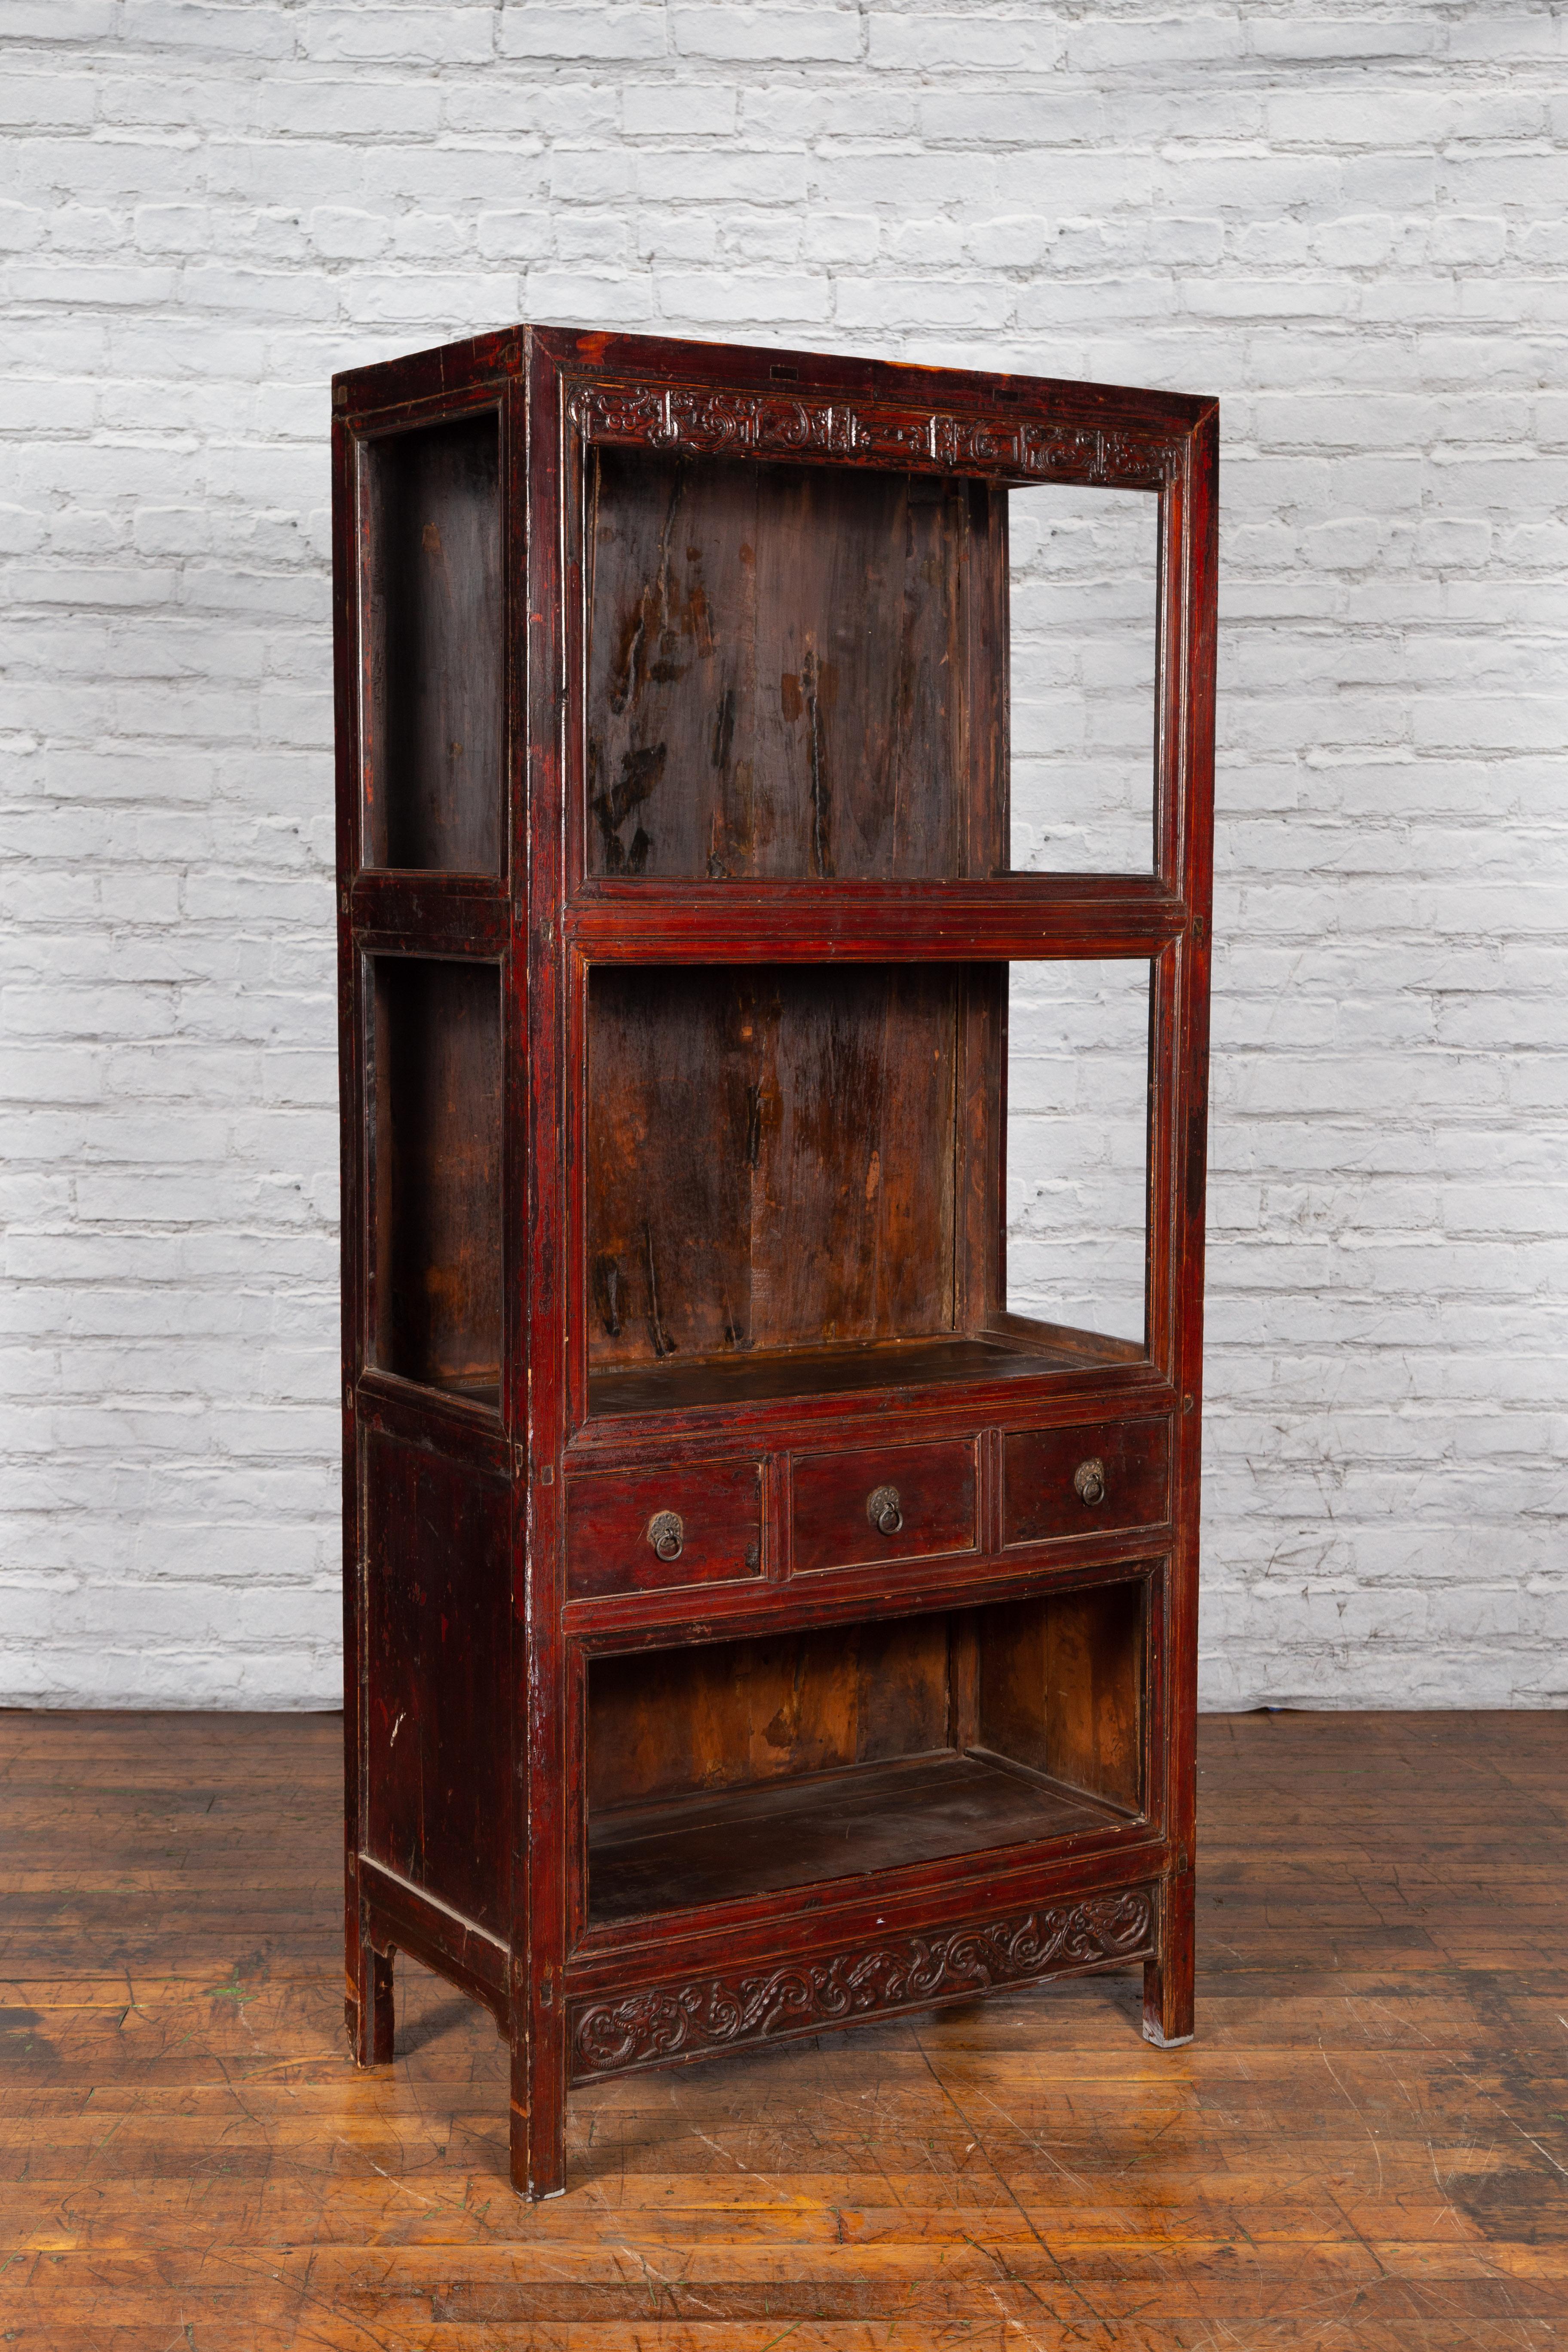 Chinese Qing Dynasty 19th Century Lacquered Cabinet with Carved Dragon Motifs For Sale 6